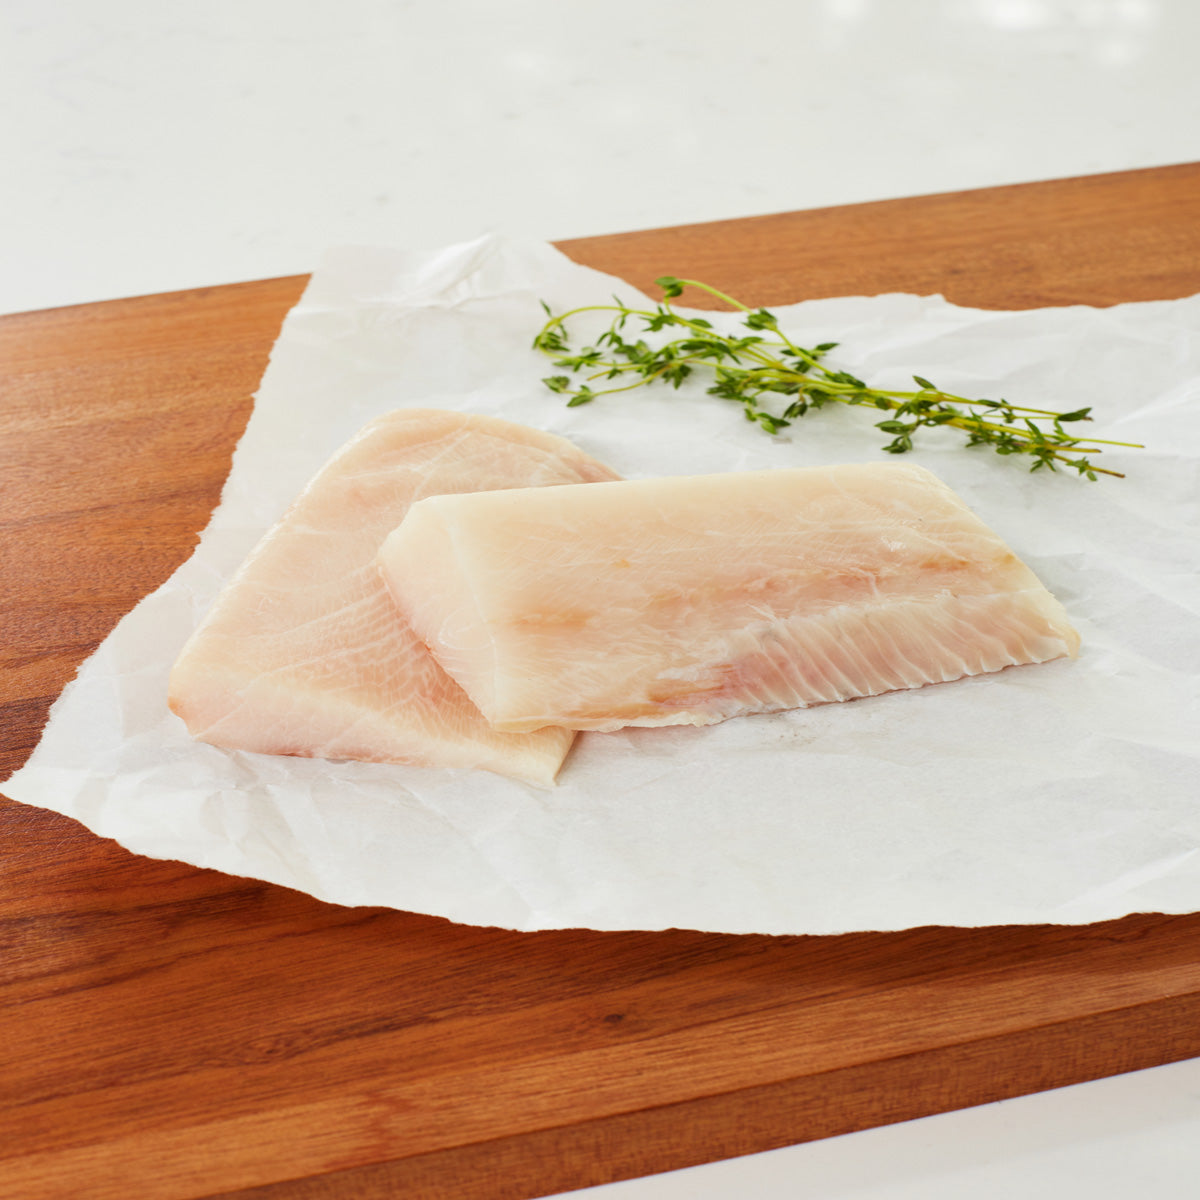 2 raw cobia filets on a cutting board ready to be cooked.